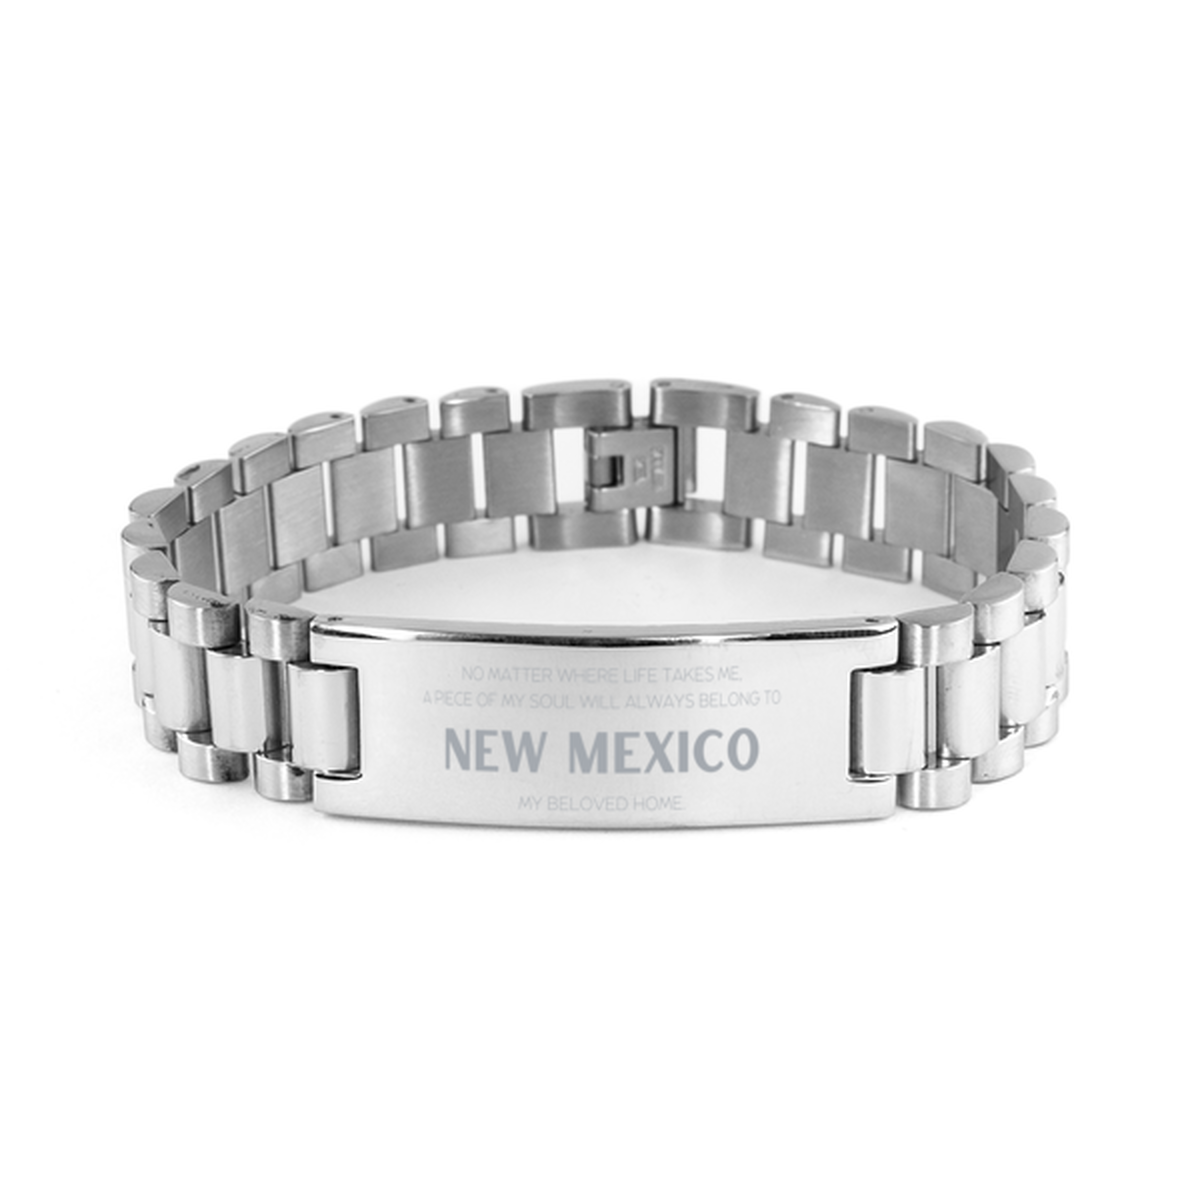 Love New Mexico State Gifts, My soul will always belong to New Mexico, Proud Ladder Stainless Steel Bracelet, Birthday Unique Gifts For New Mexico Men, Women, Friends